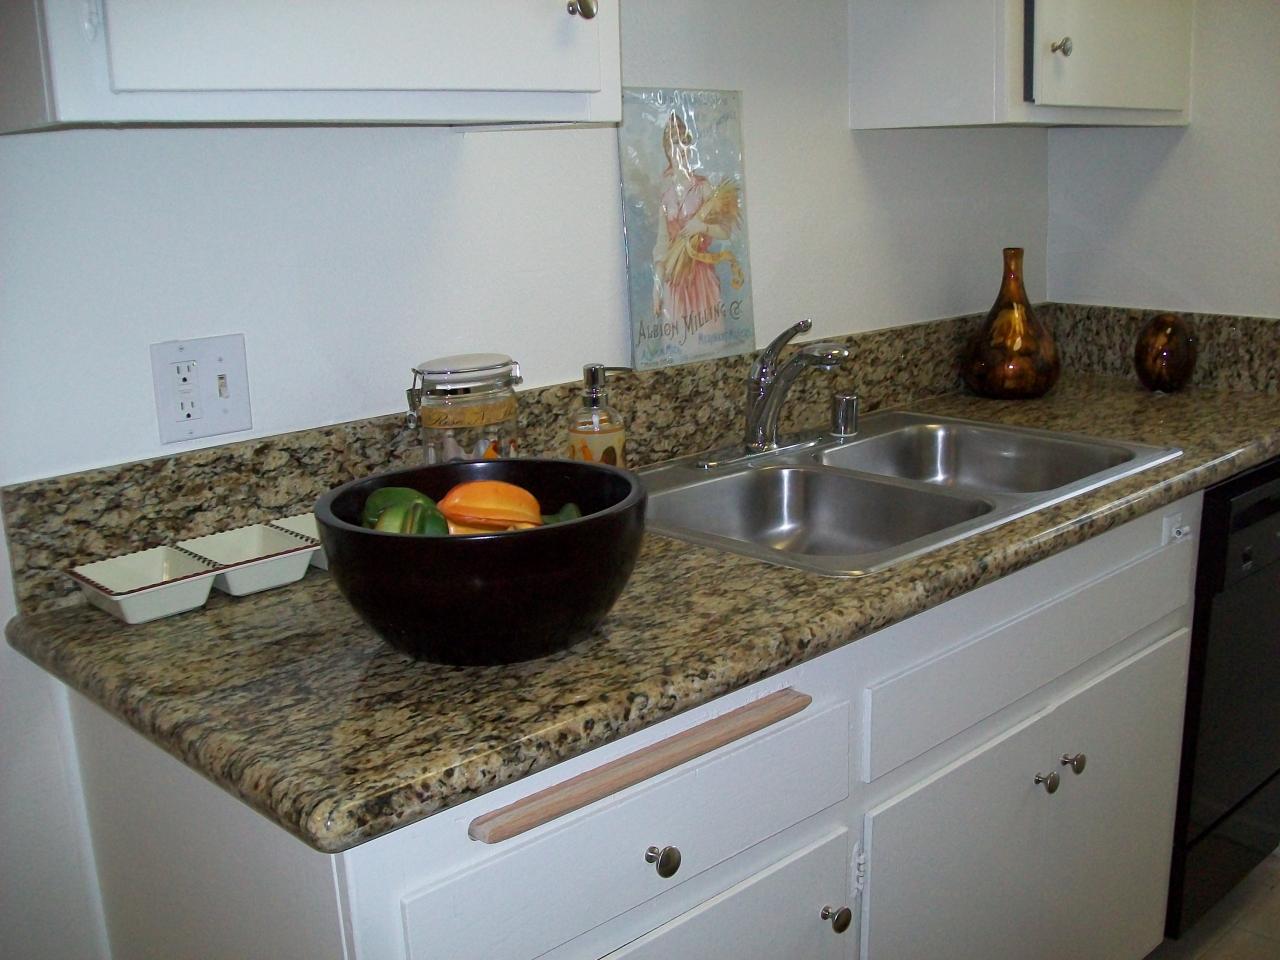 Photo of Kingsbury Villas Apartments - another view of a kitchen sink and counter